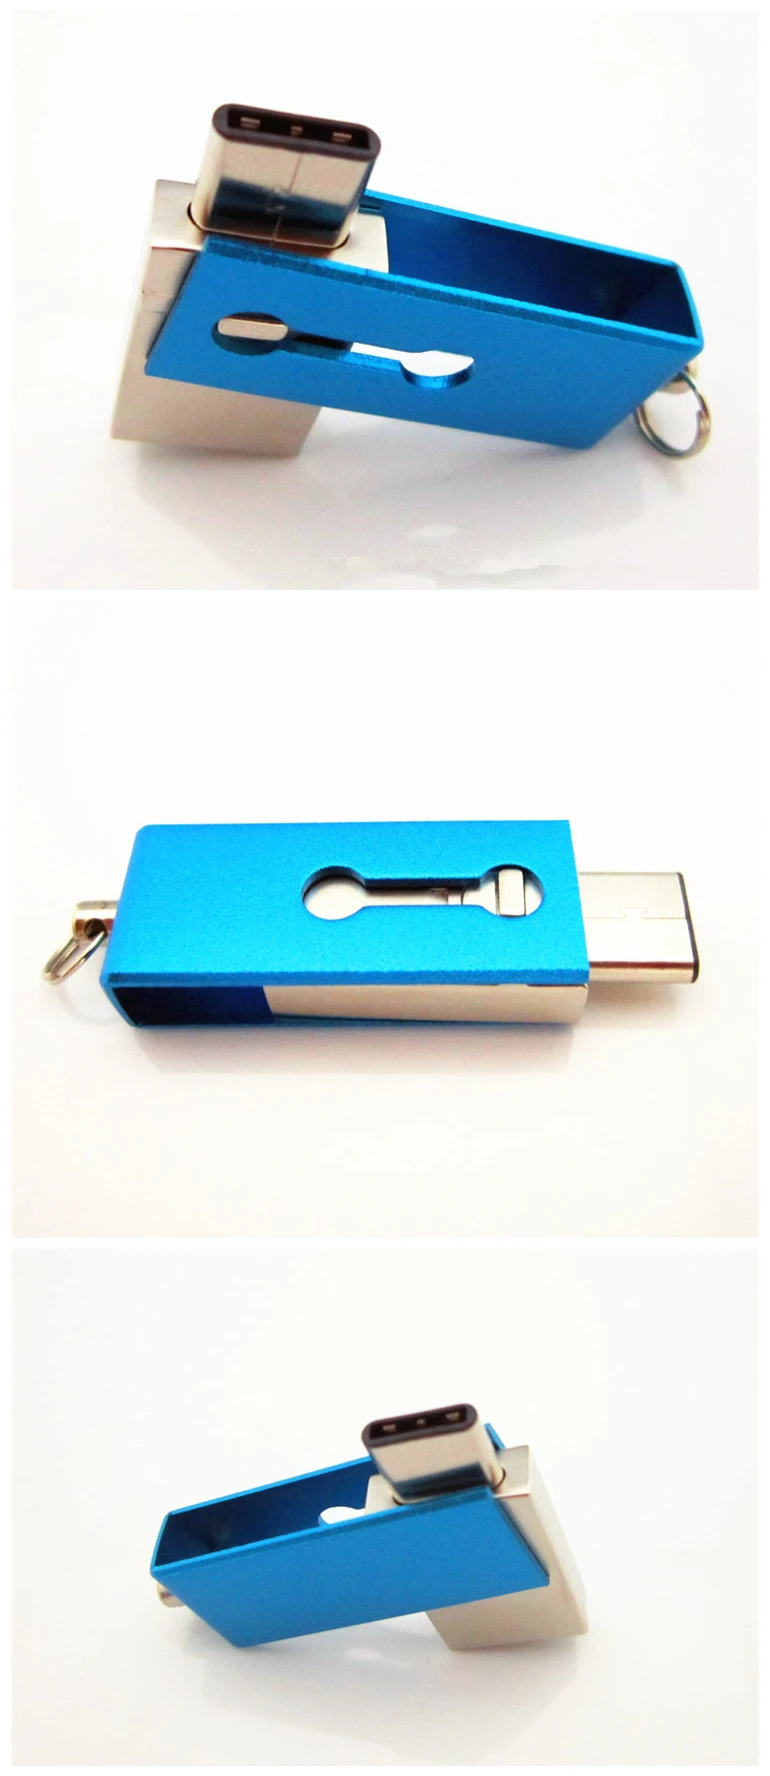 M-OT12 smartphone 2 in 1 usb flash drive for PC / Type-C